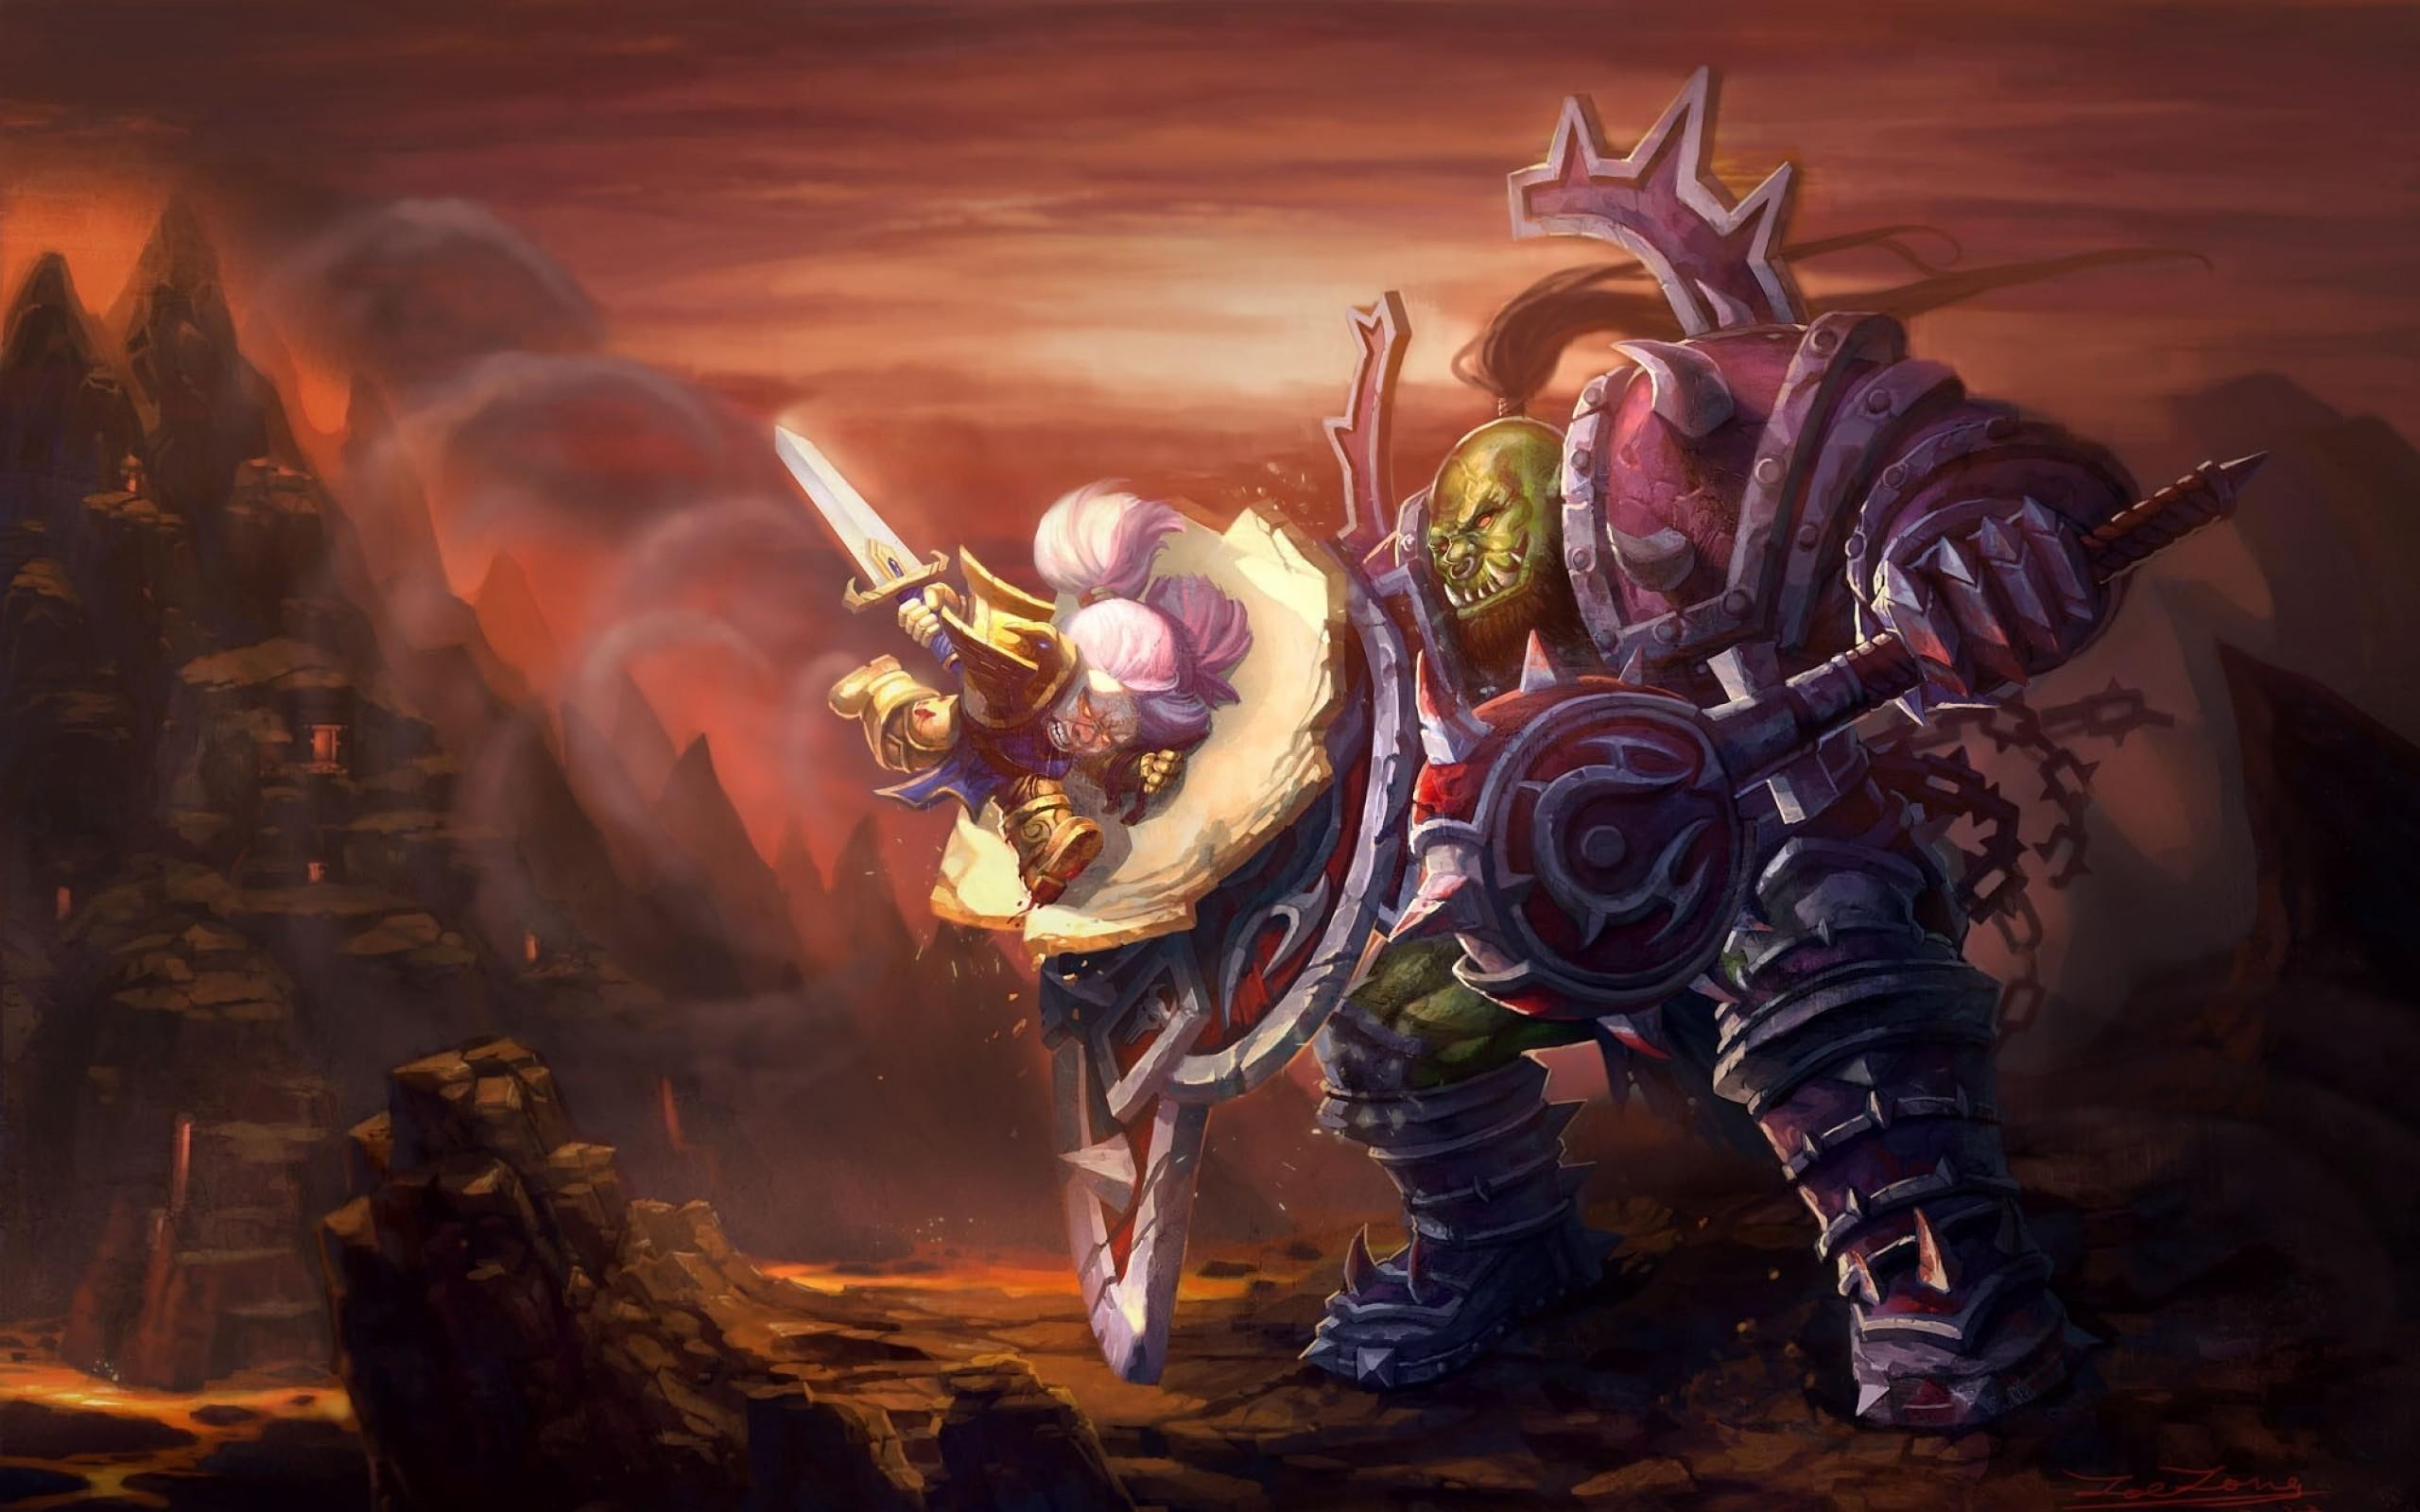 world of warcraft, wow, orc, warrior, dwarf, paladin, animated character in grey and purple armor